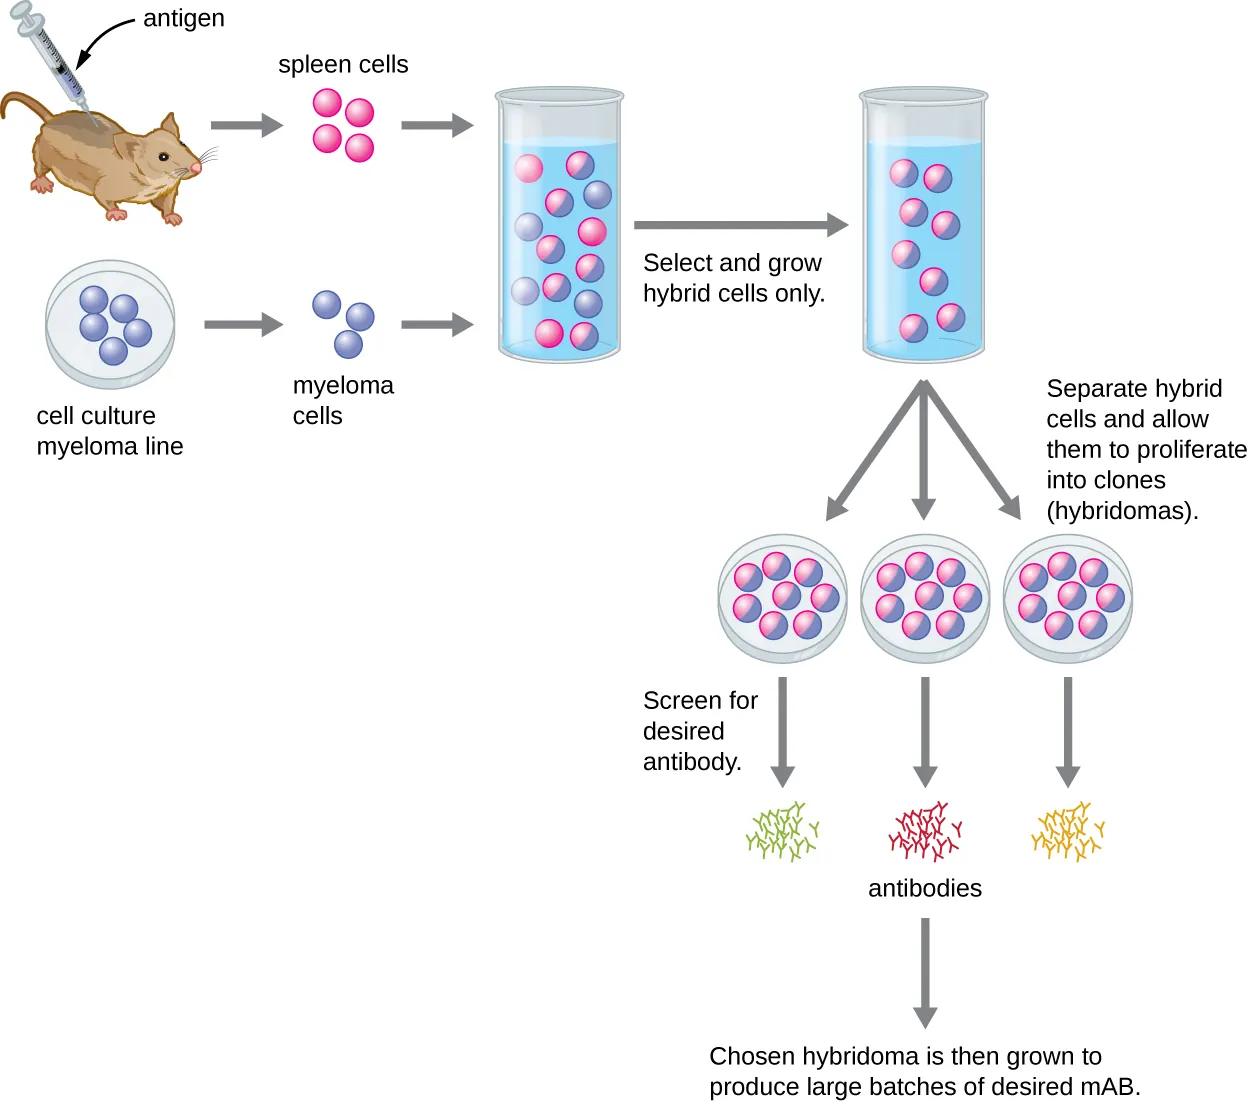 Diagram showing production of monoclonal antibodies. Antigen is injected into an animal (such as a mouse) Spleen cells are extracted. Myeloma line cells from a cell culture are added to the spleen cells in a test tube. Then, hybrid cells are selected and grown. Hybrid cells are separated and allowed to proliferate into clones (hybridomas). Each hybrid produces a different antibody and the desired antibody is selected. This hybridoma is then grown to produce large batches of desired mAB.